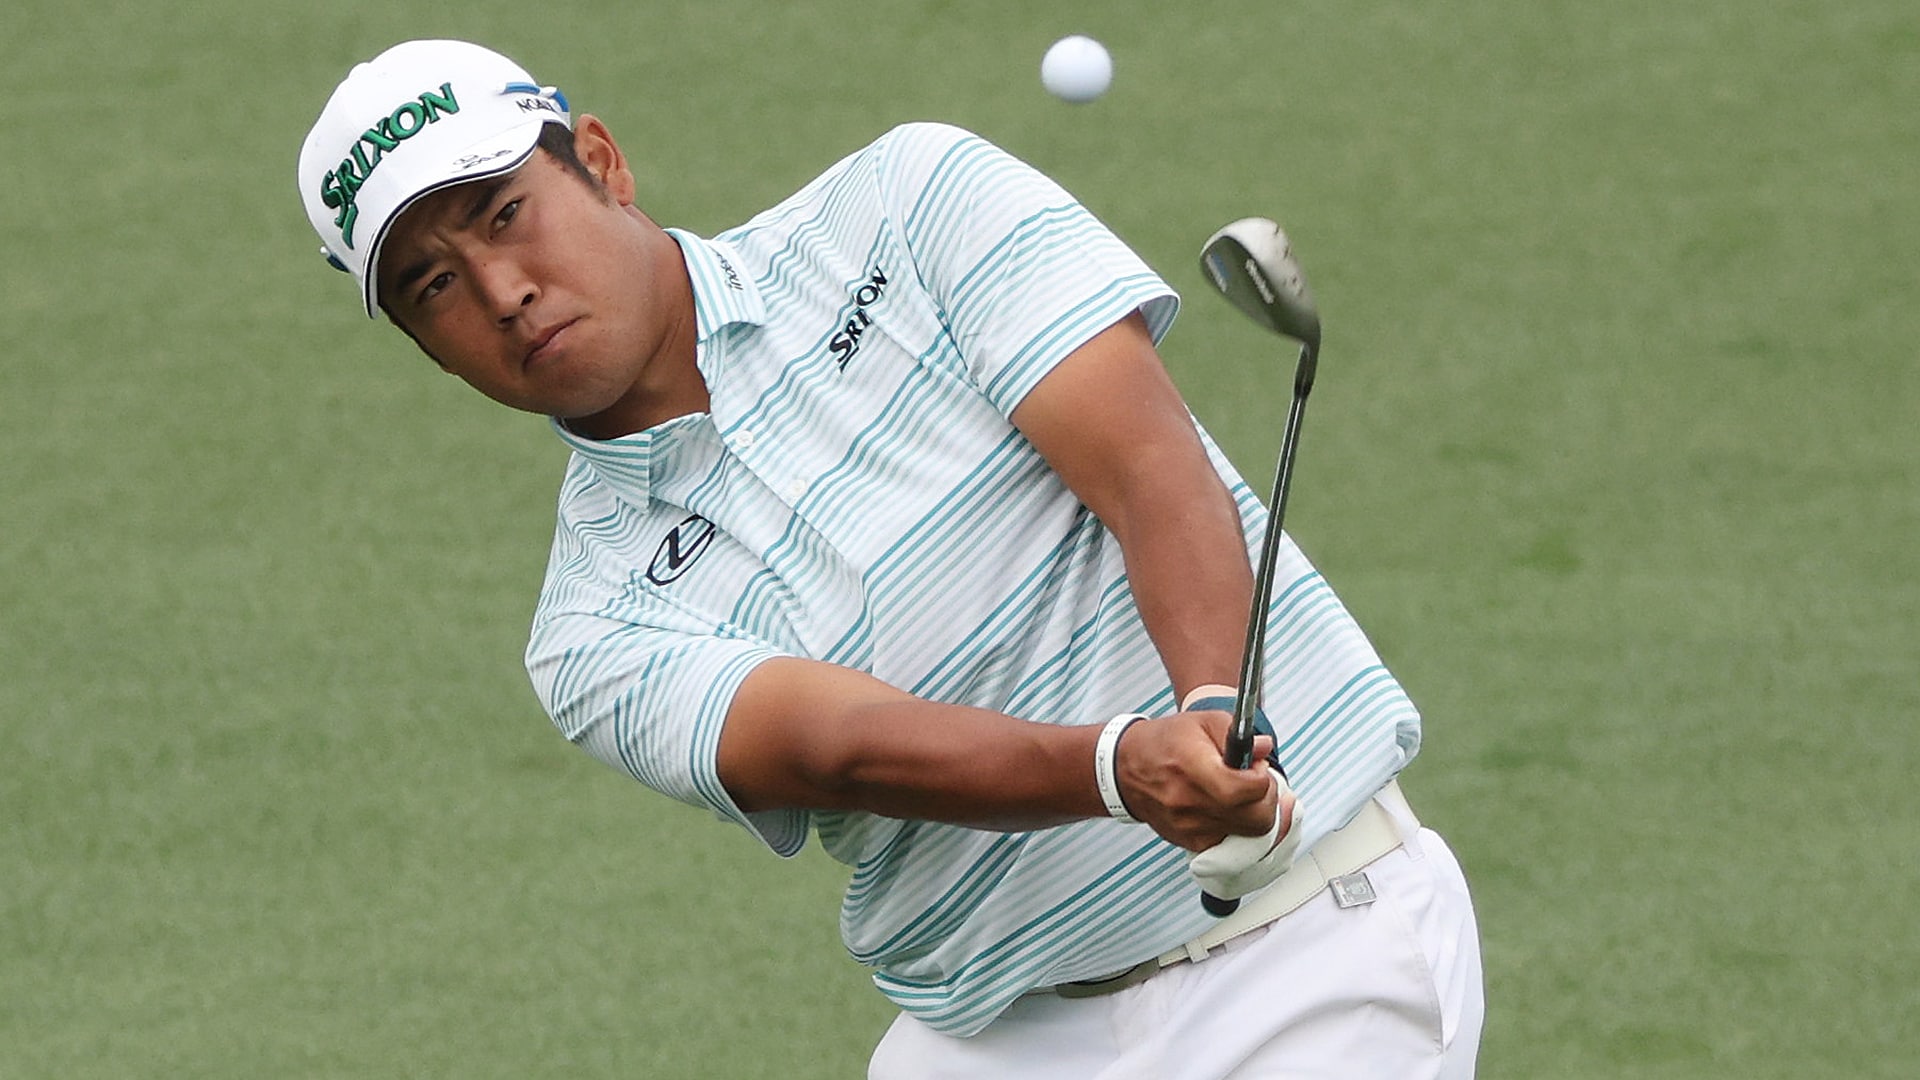 Hideki Matsuyama withdraws from Rocket Mortgage after positive COVID-19 test